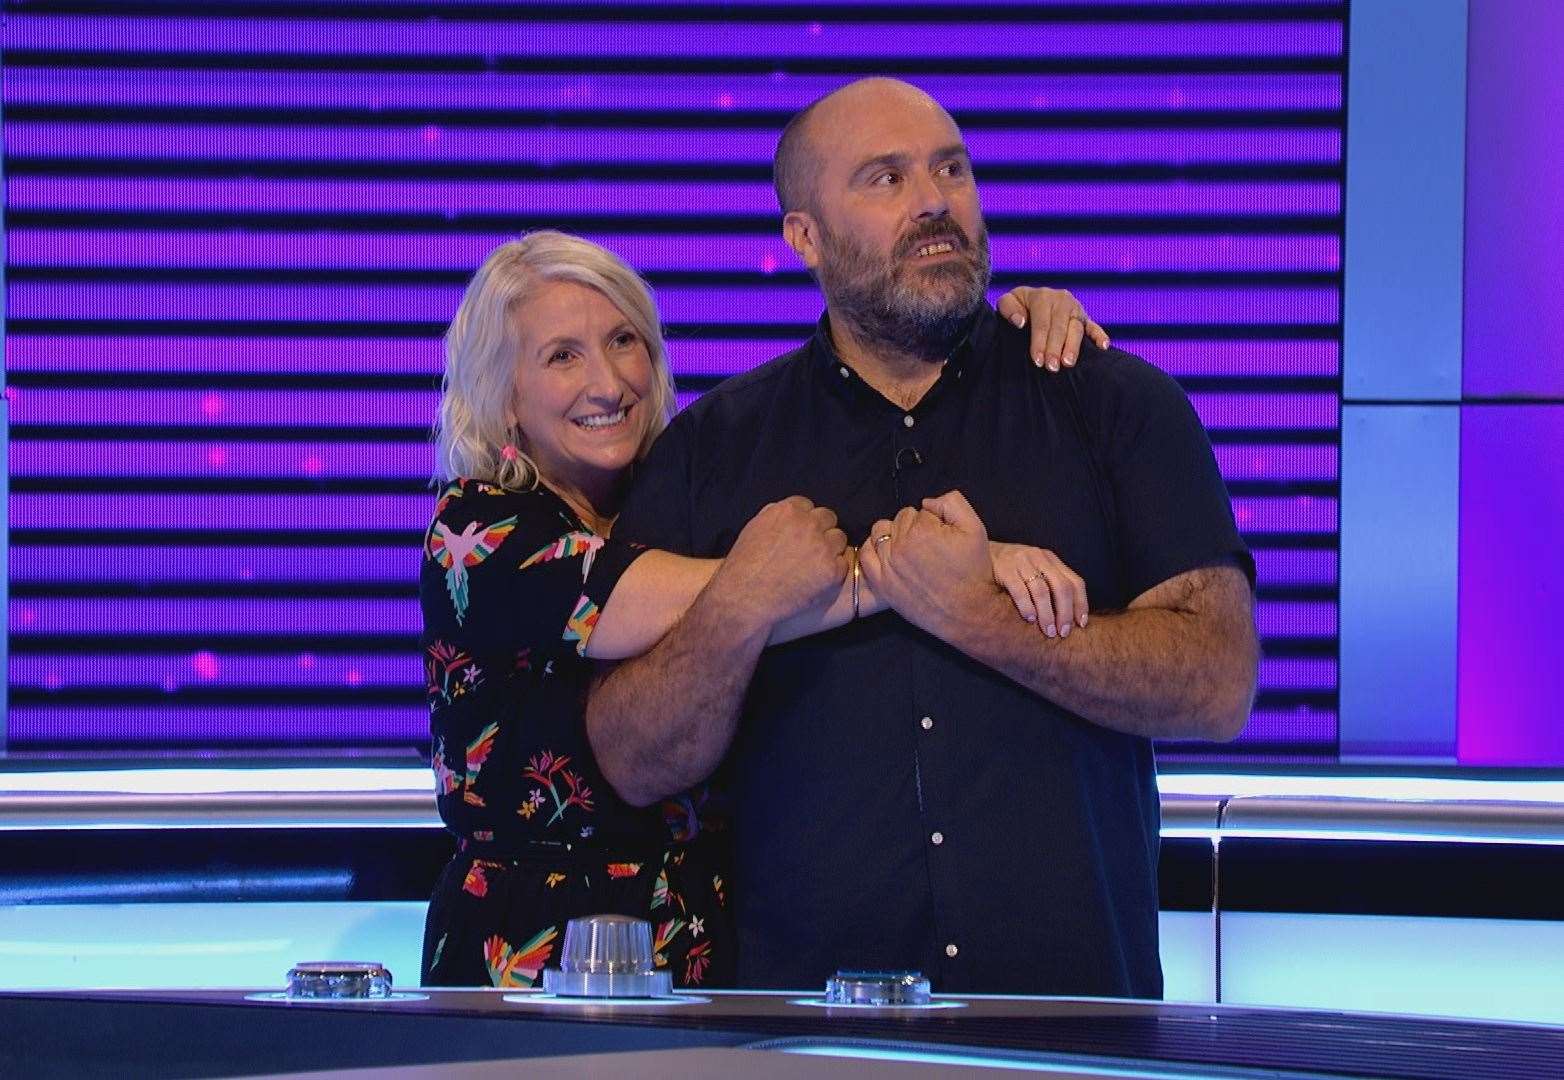 The couple played a strong game and Charlie's music knowledge secured them the jackpot. Picture: ITV